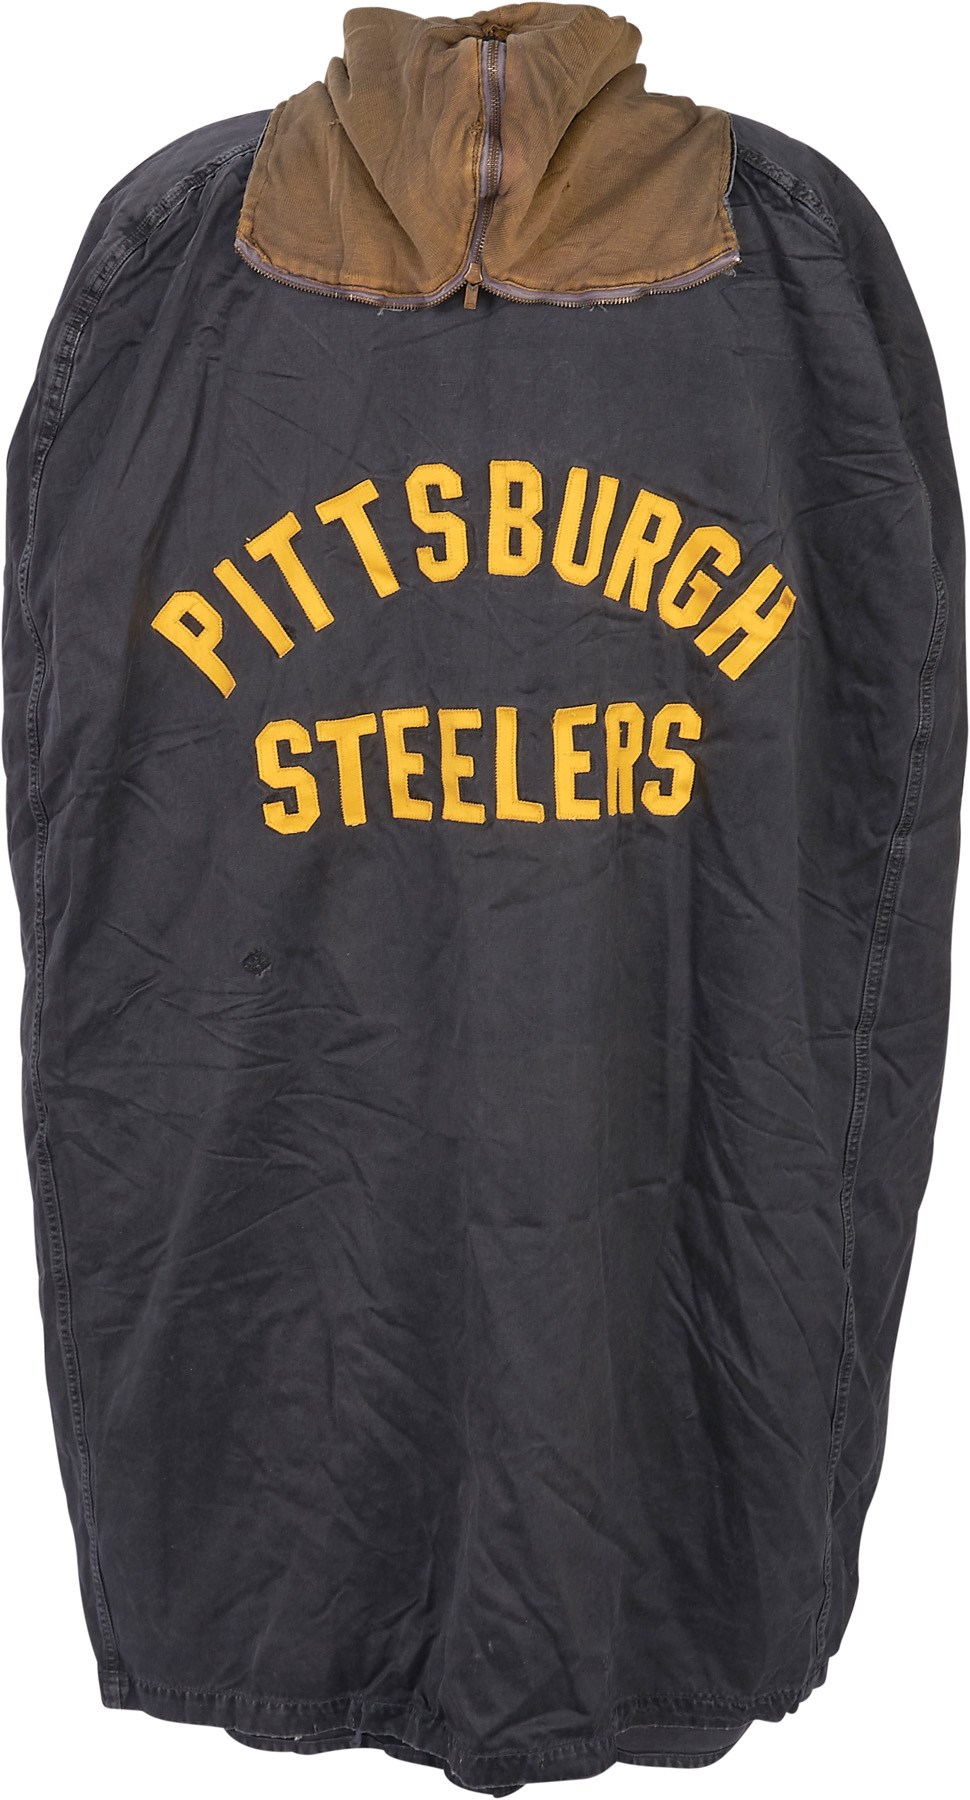 The Pittsburgh Steelers Game Worn Jersey Archive - Vintage Pittsburgh Steelers Game Worn Sideline Cape